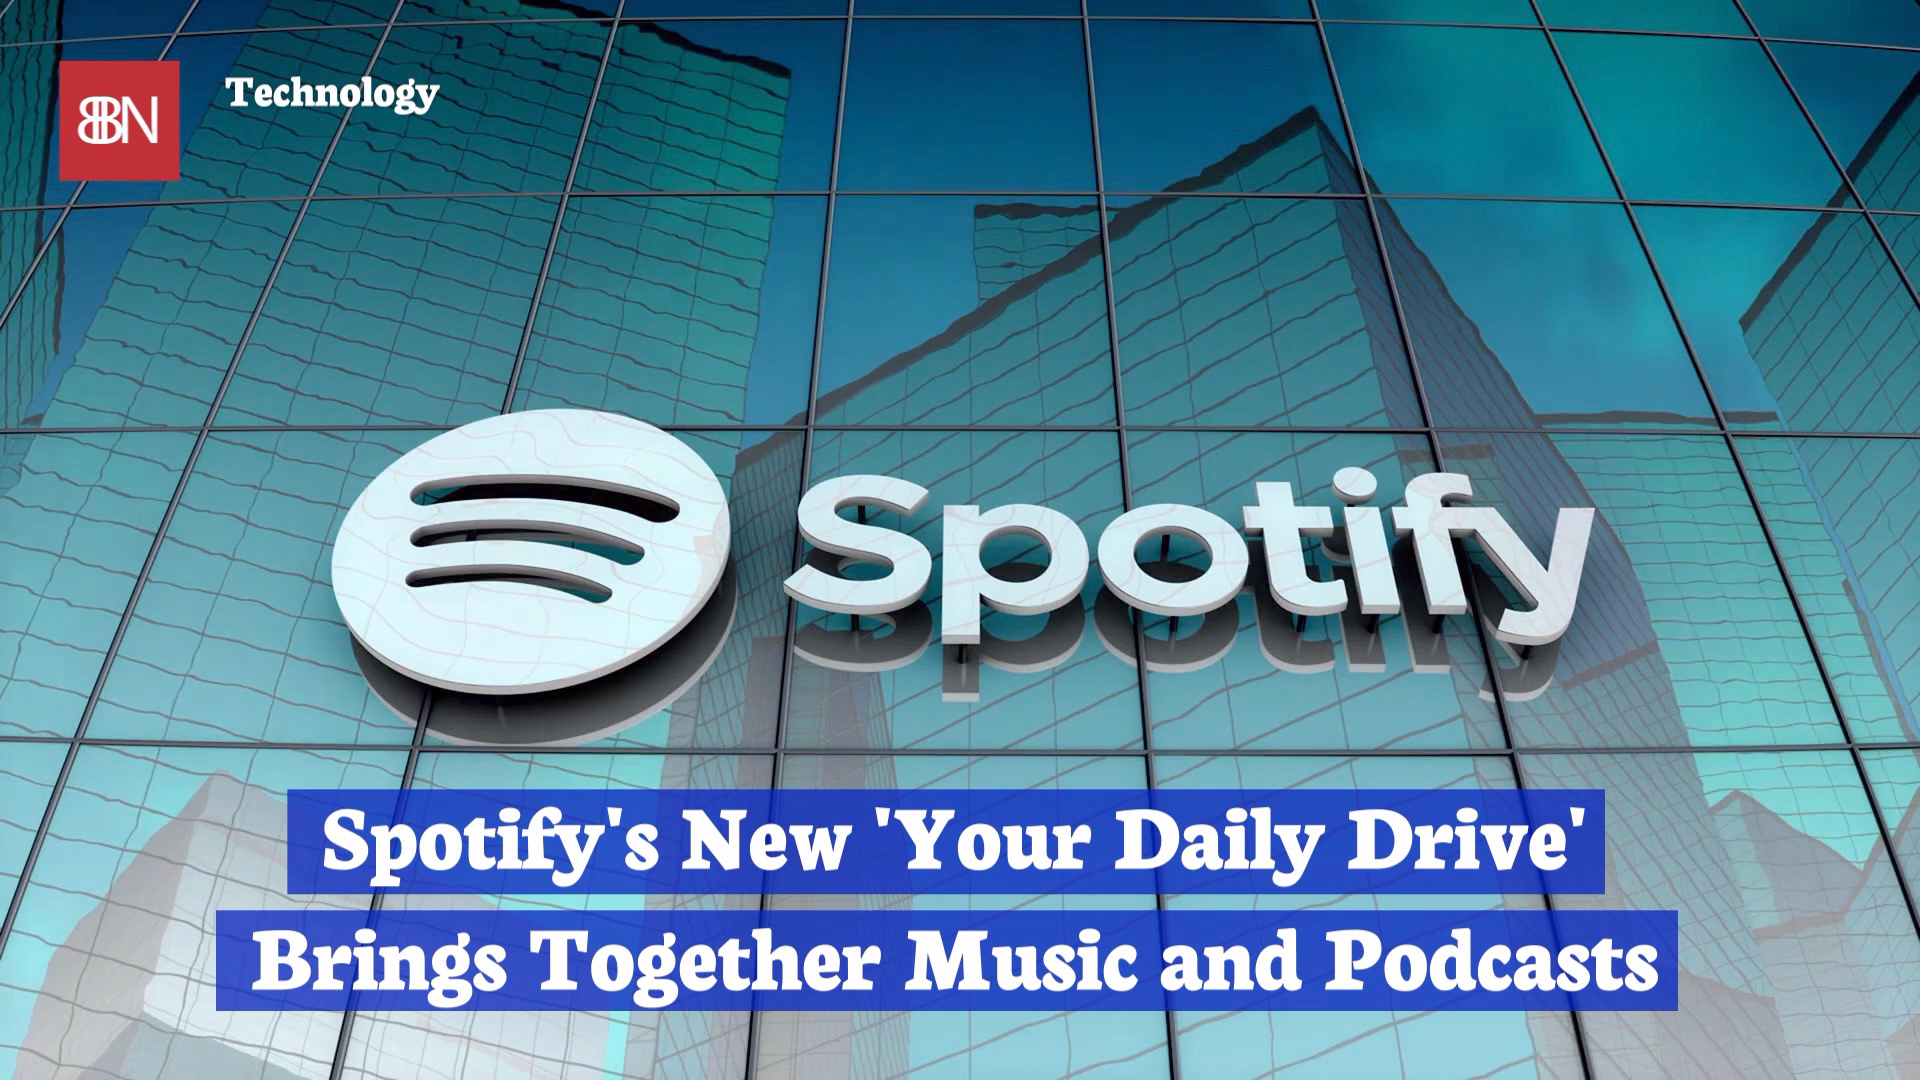 Spotify Introduces “Your Daily Drive”